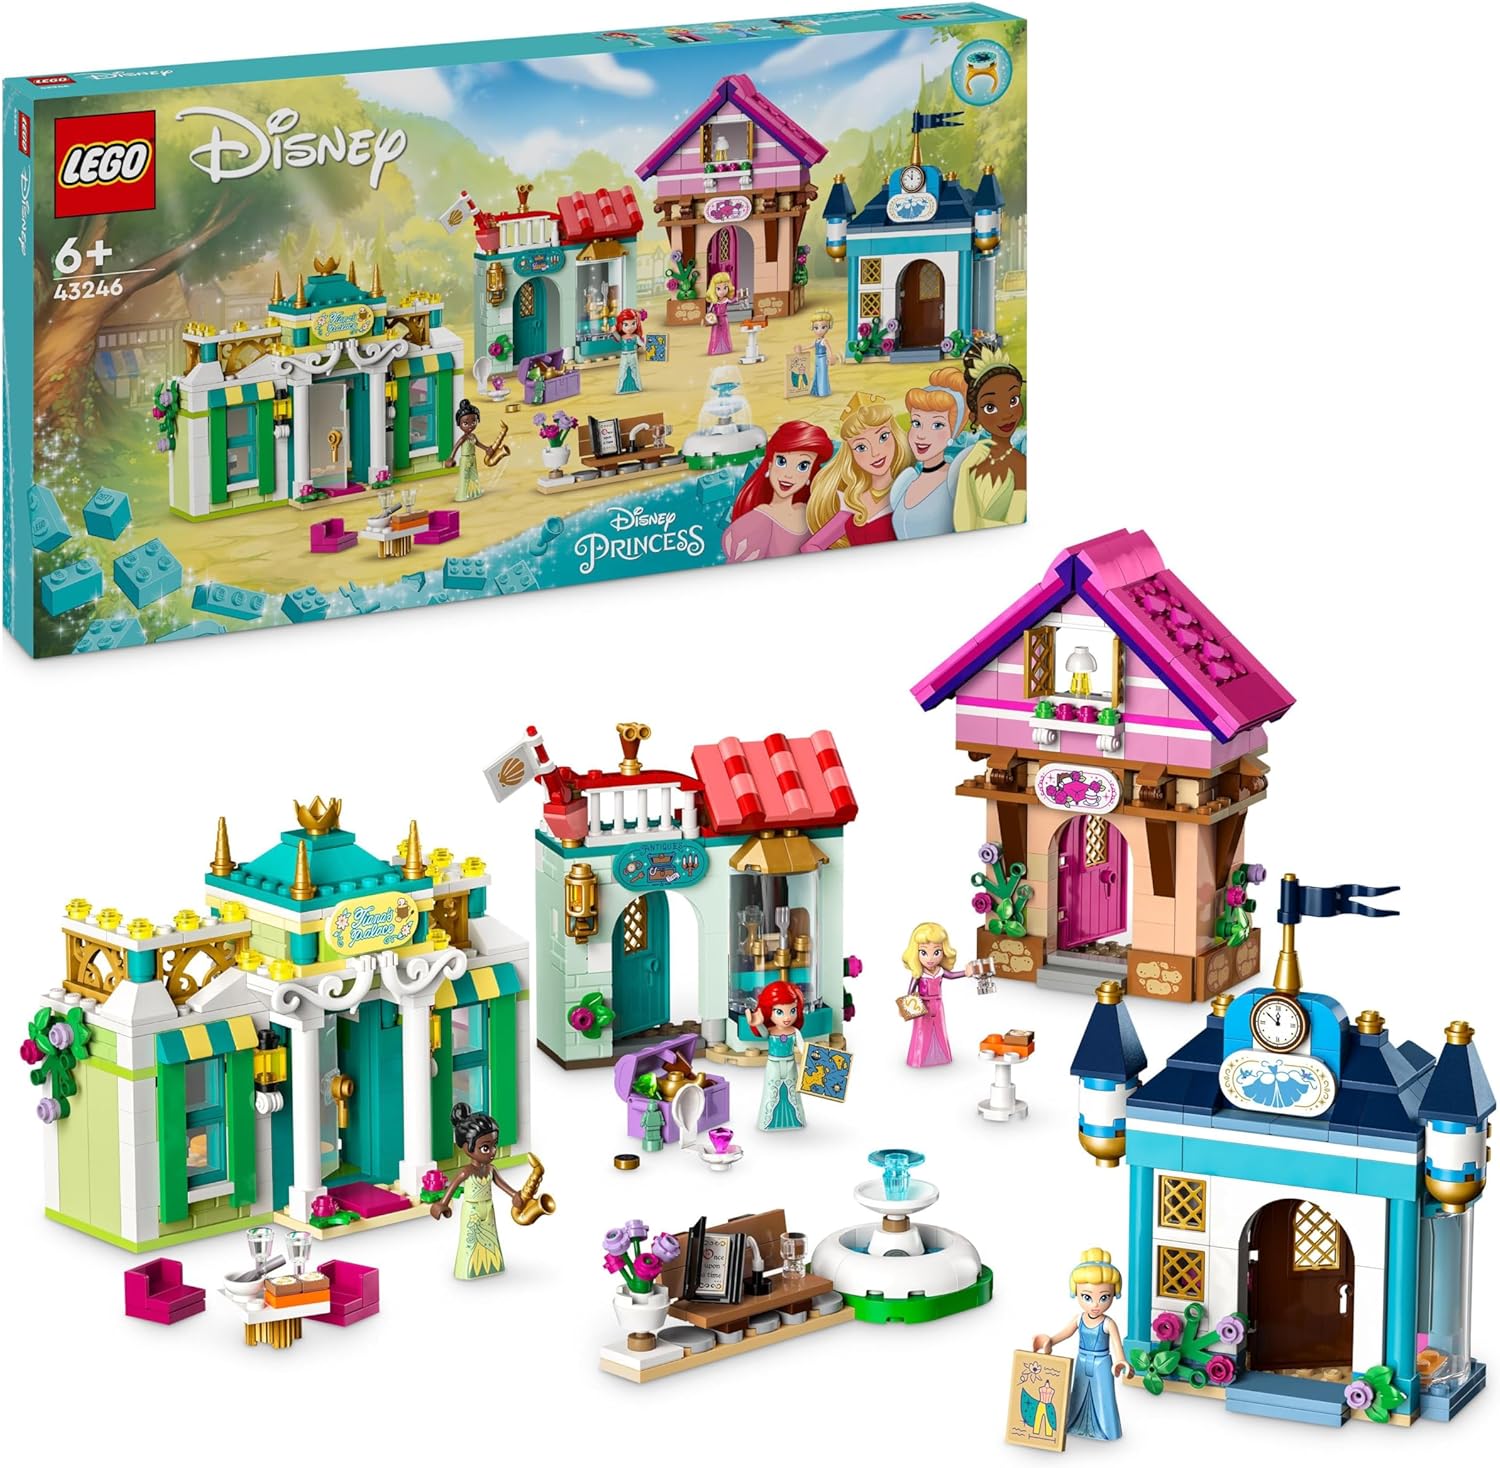 LEGO Disney Princess: Disney Princess Adventure Market, House Toy with 4 Dolls Including Cinderella and Ariel, Play Set with Treasure Map, Gift for Girls and Boys from 6 Years 43246